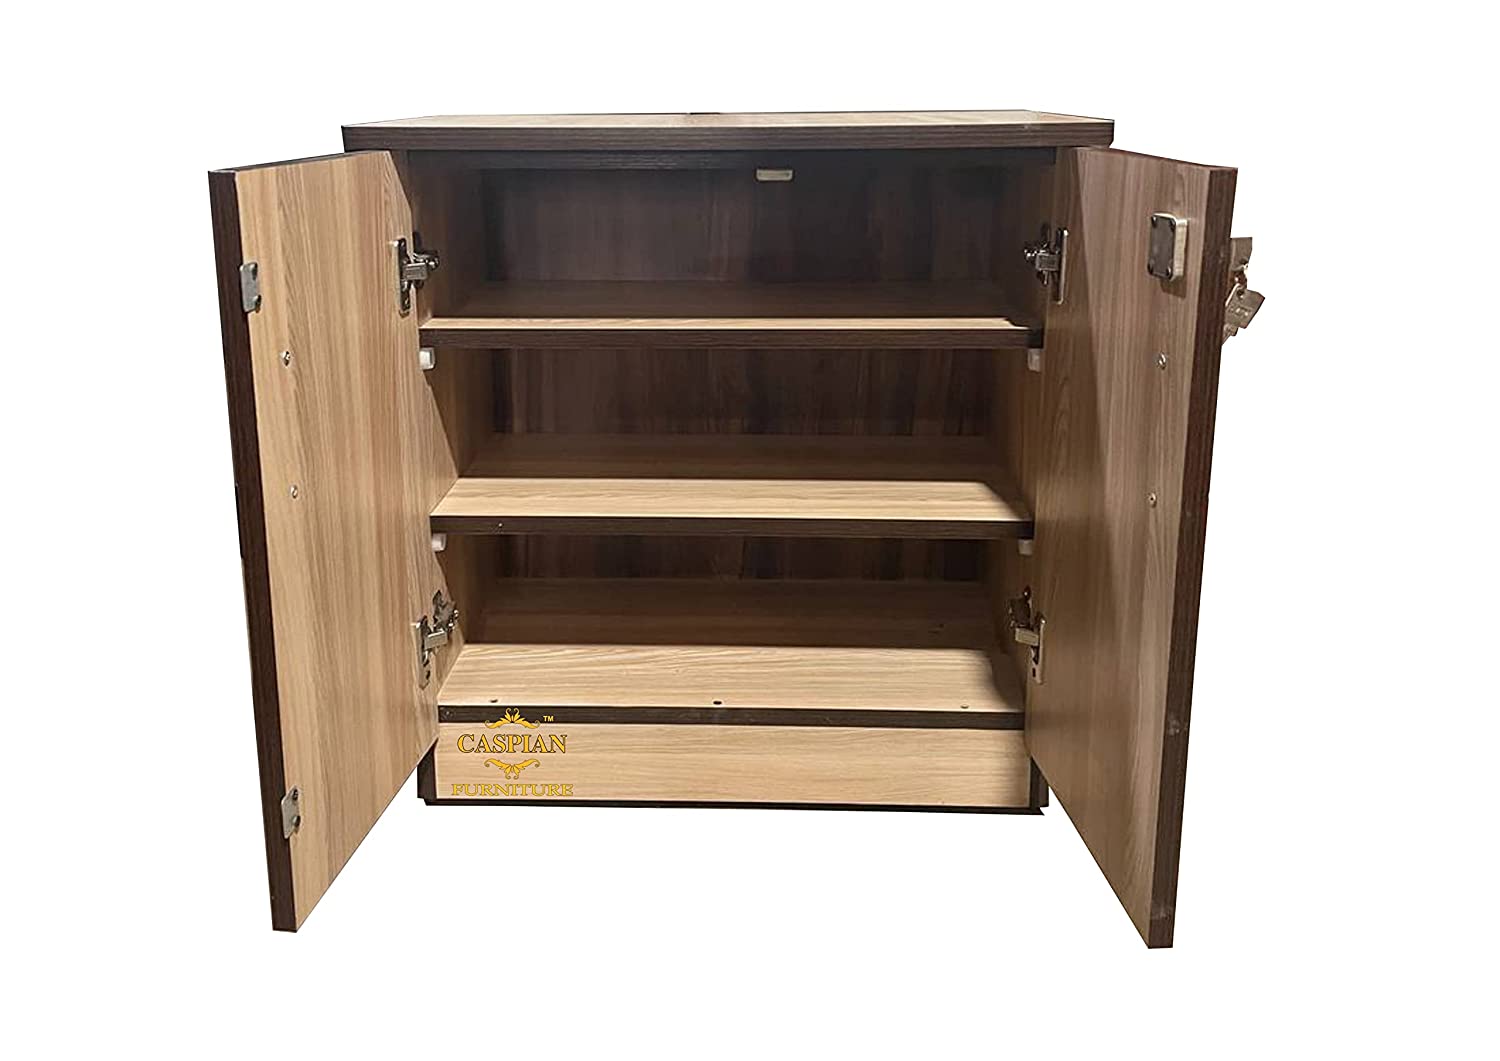 Engineered Wood 3 Tier Shoe Rack in Siam Teak Finish| Shoe Cabinet | Hall Way Furniture | Outdoor Cabinet with Lock | Size 24 x 24 inches